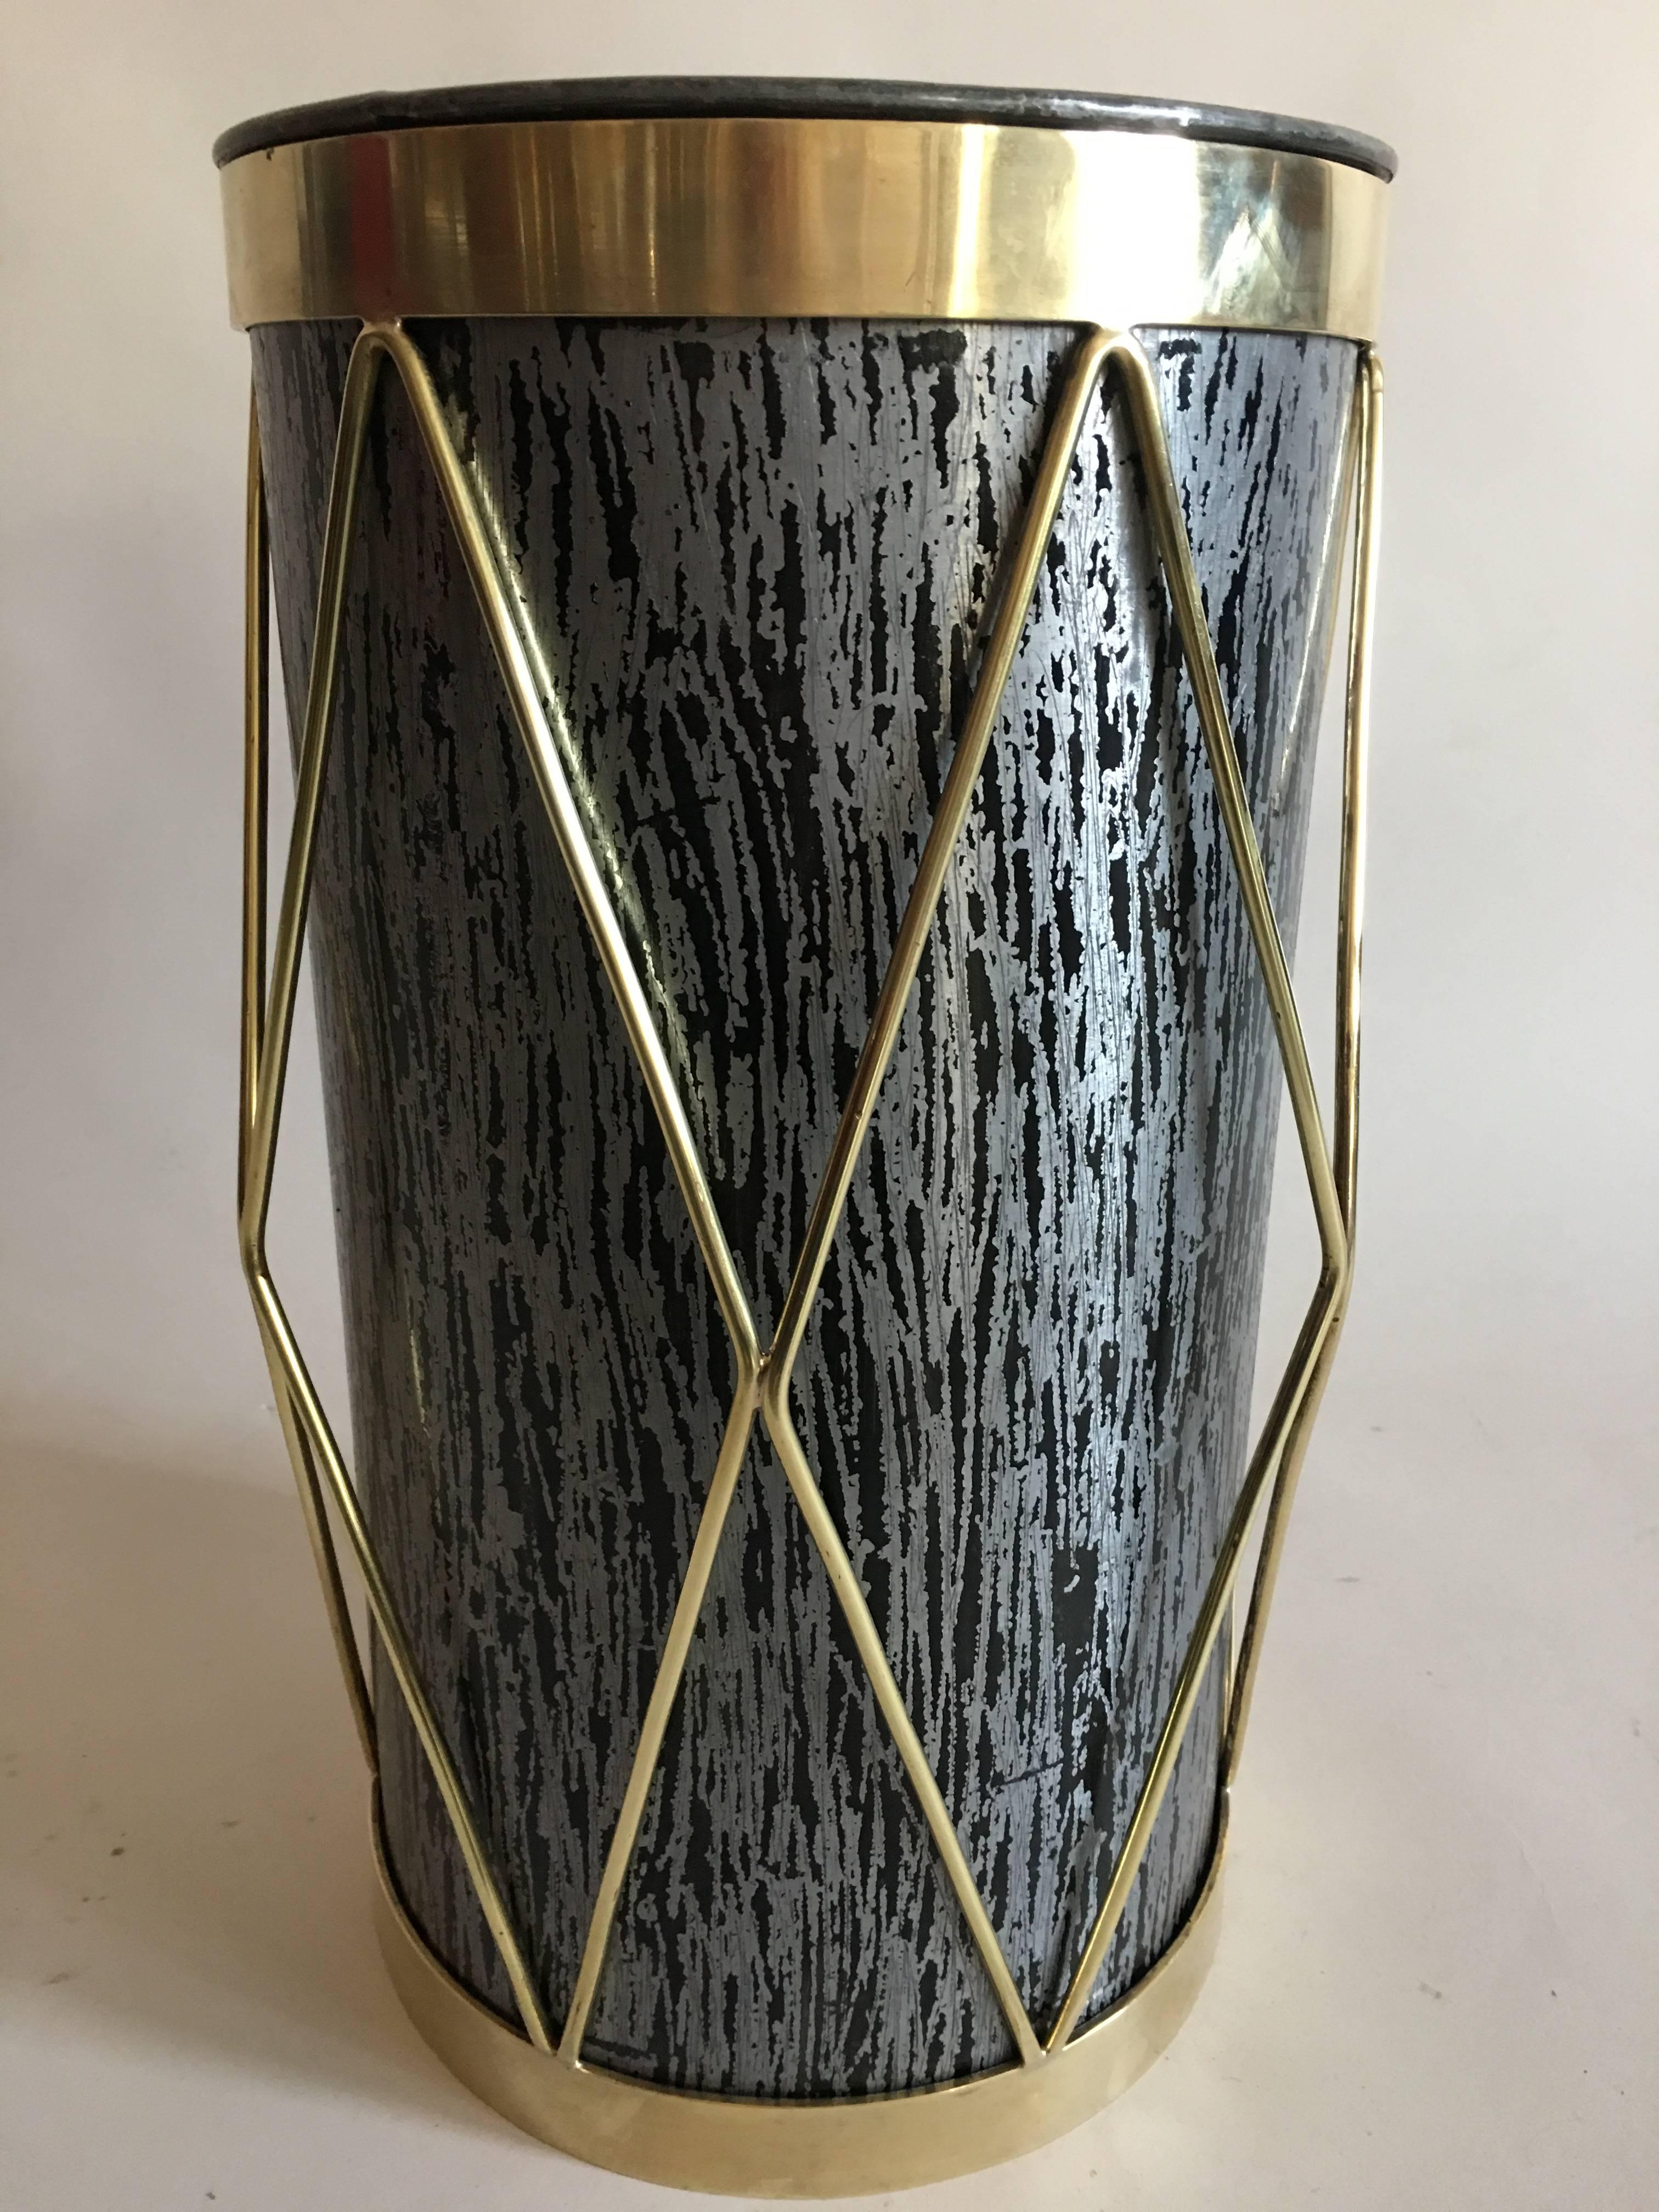 2 French Mid-Century Modern Umbrella Stands or Waste baskets by Maison Jansen In Good Condition For Sale In New York, NY